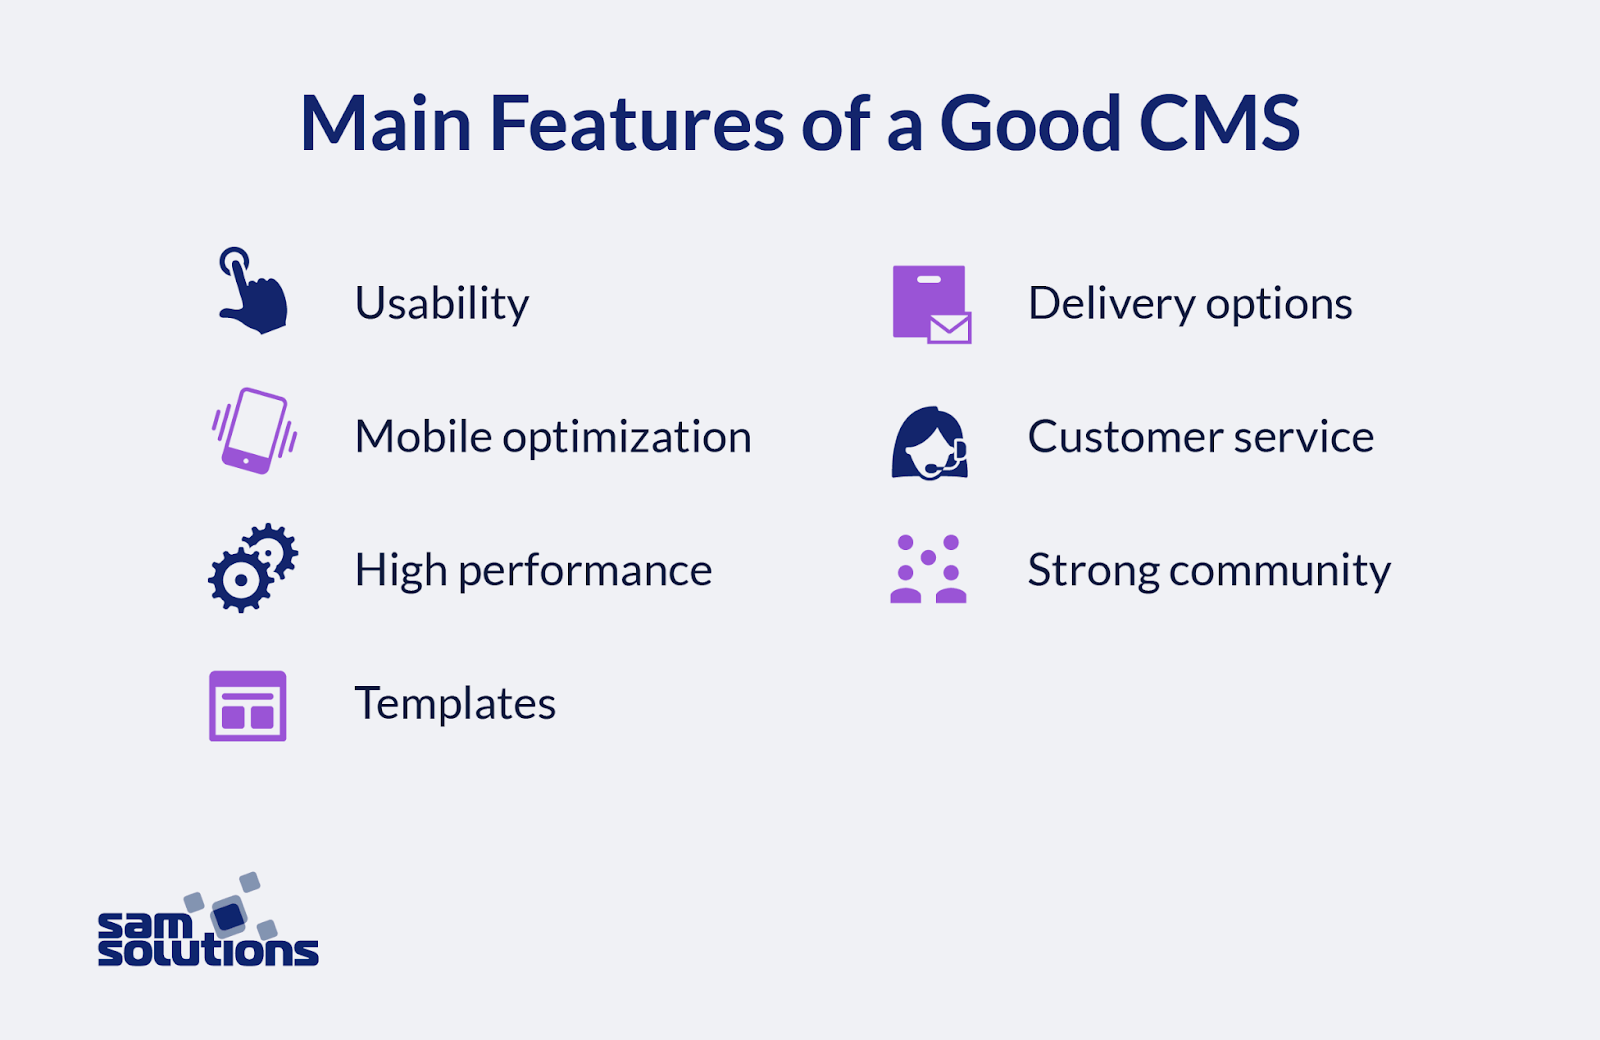 The key features of a good content management system which include; templates, high performance, customer service, and usability. 